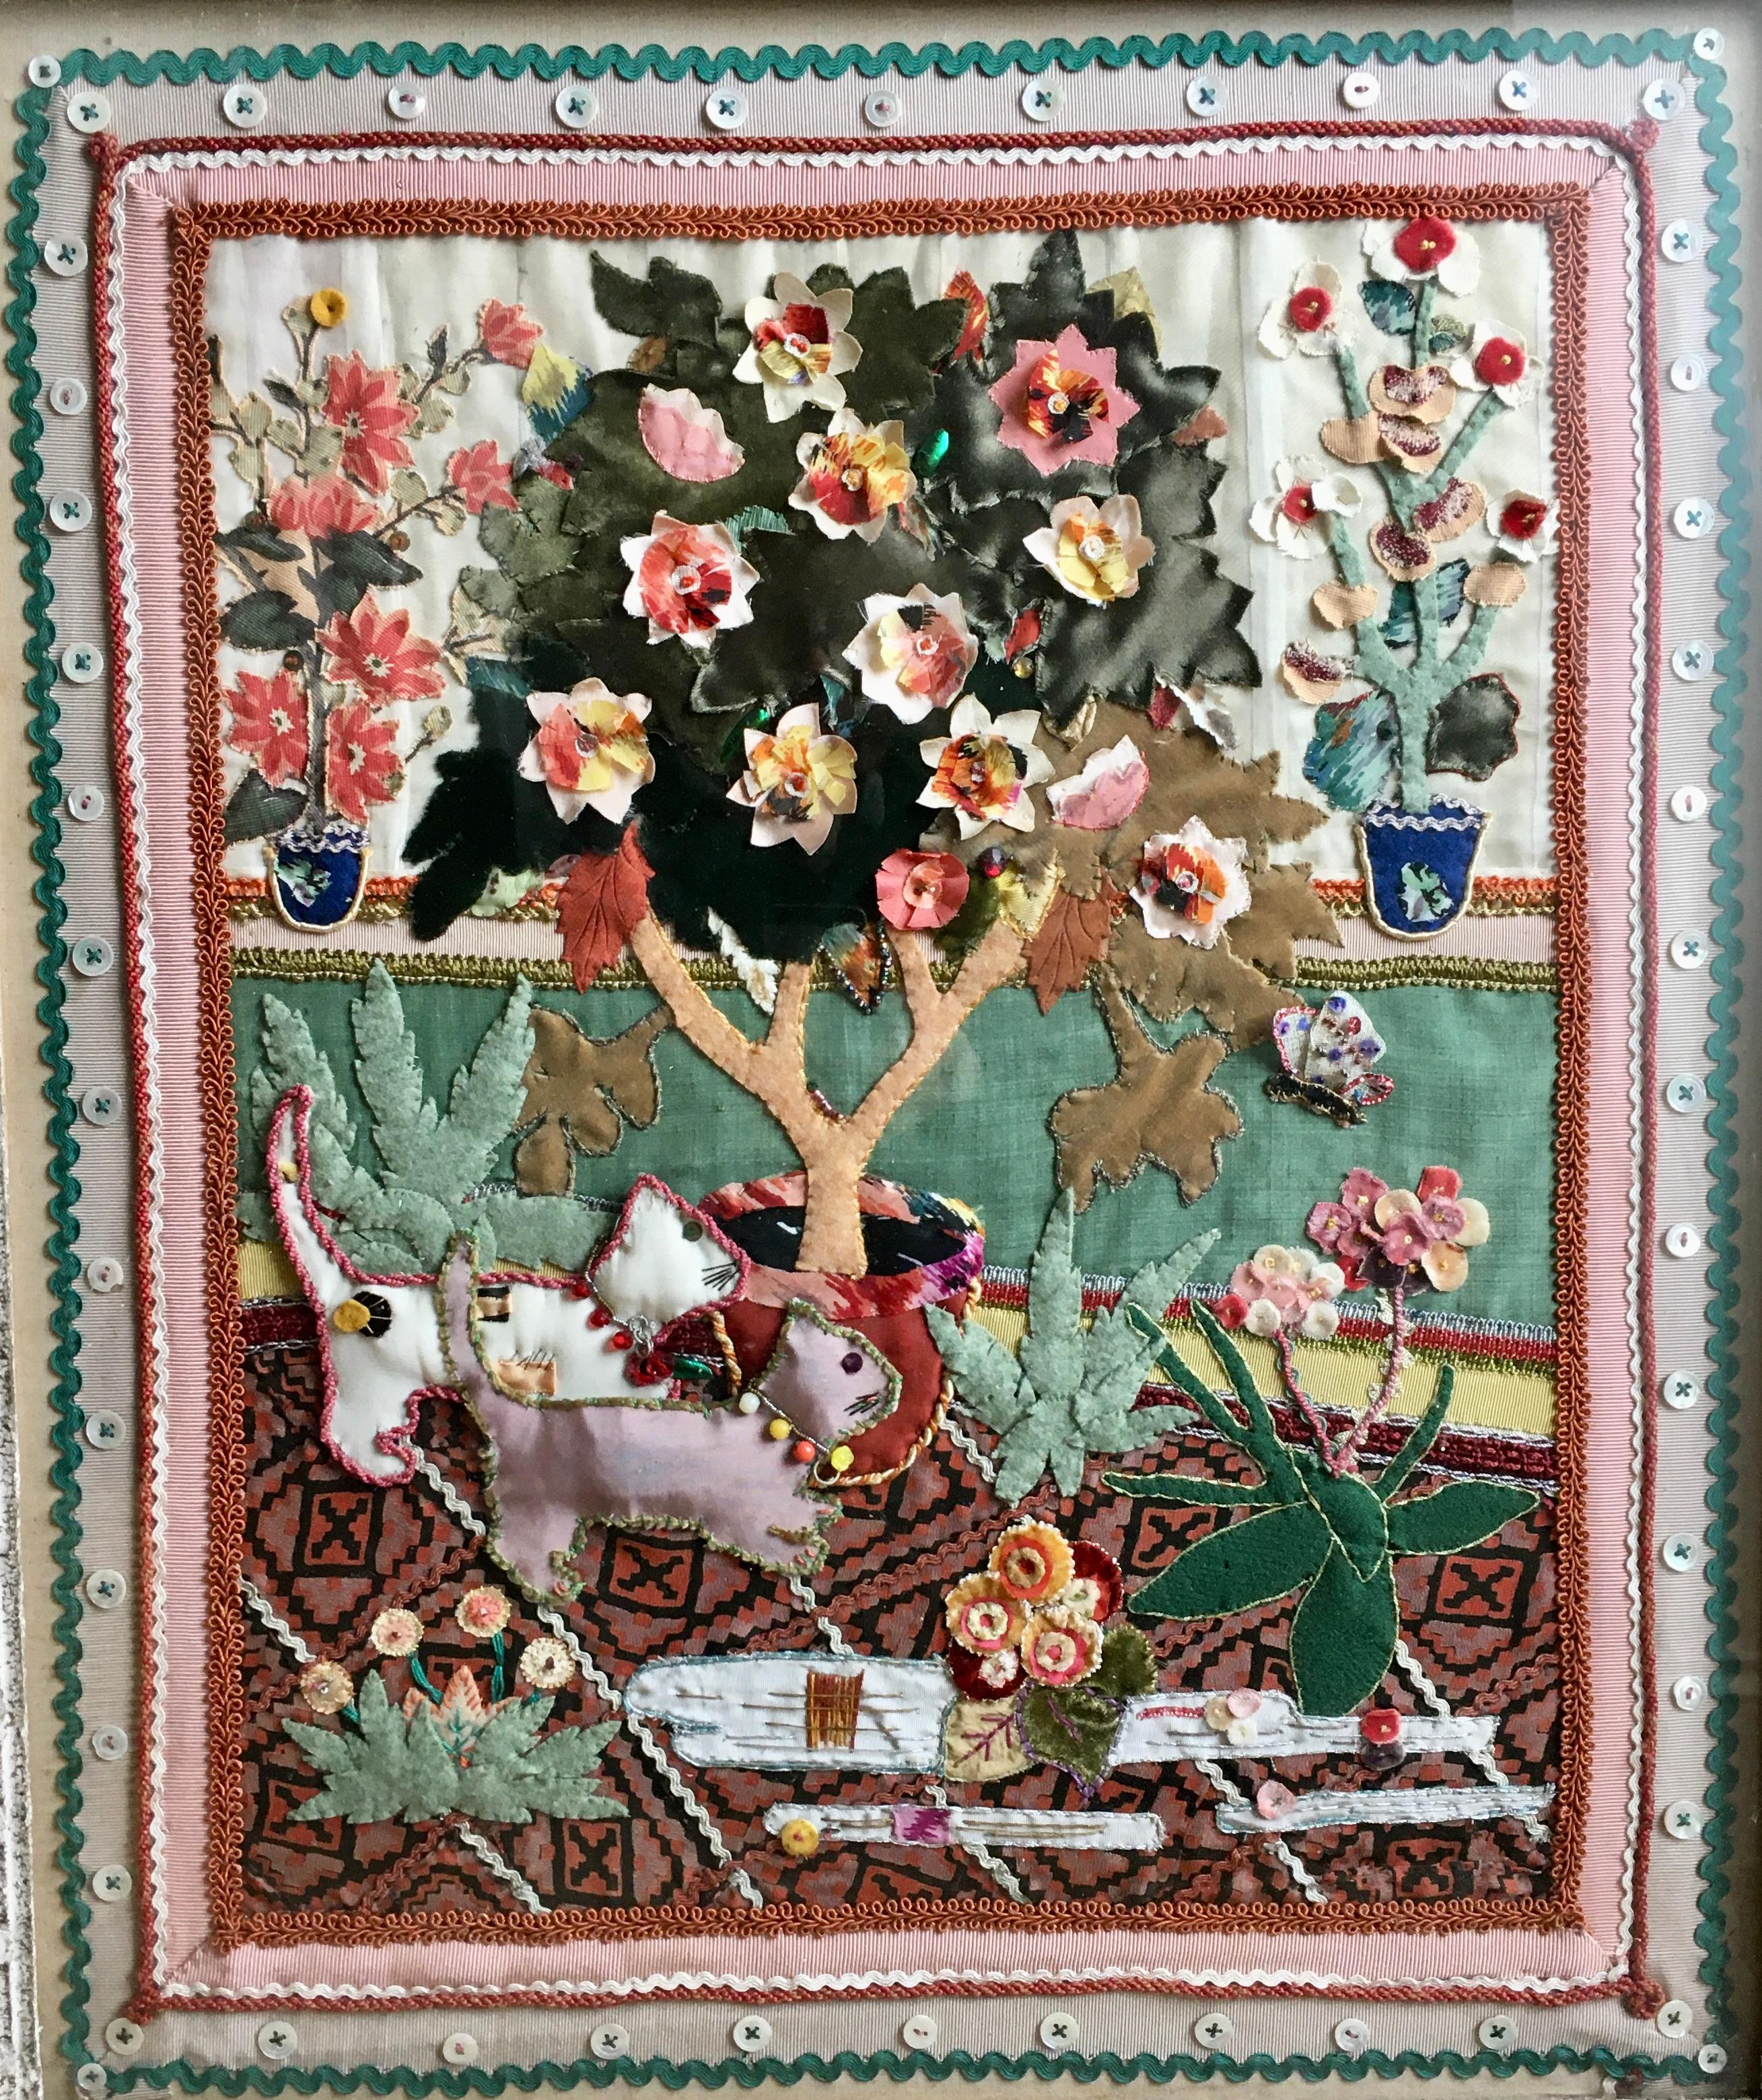 Cats and Flowers - 20th Century British Applique textile collage - Mixed Media Art by Constance Howard